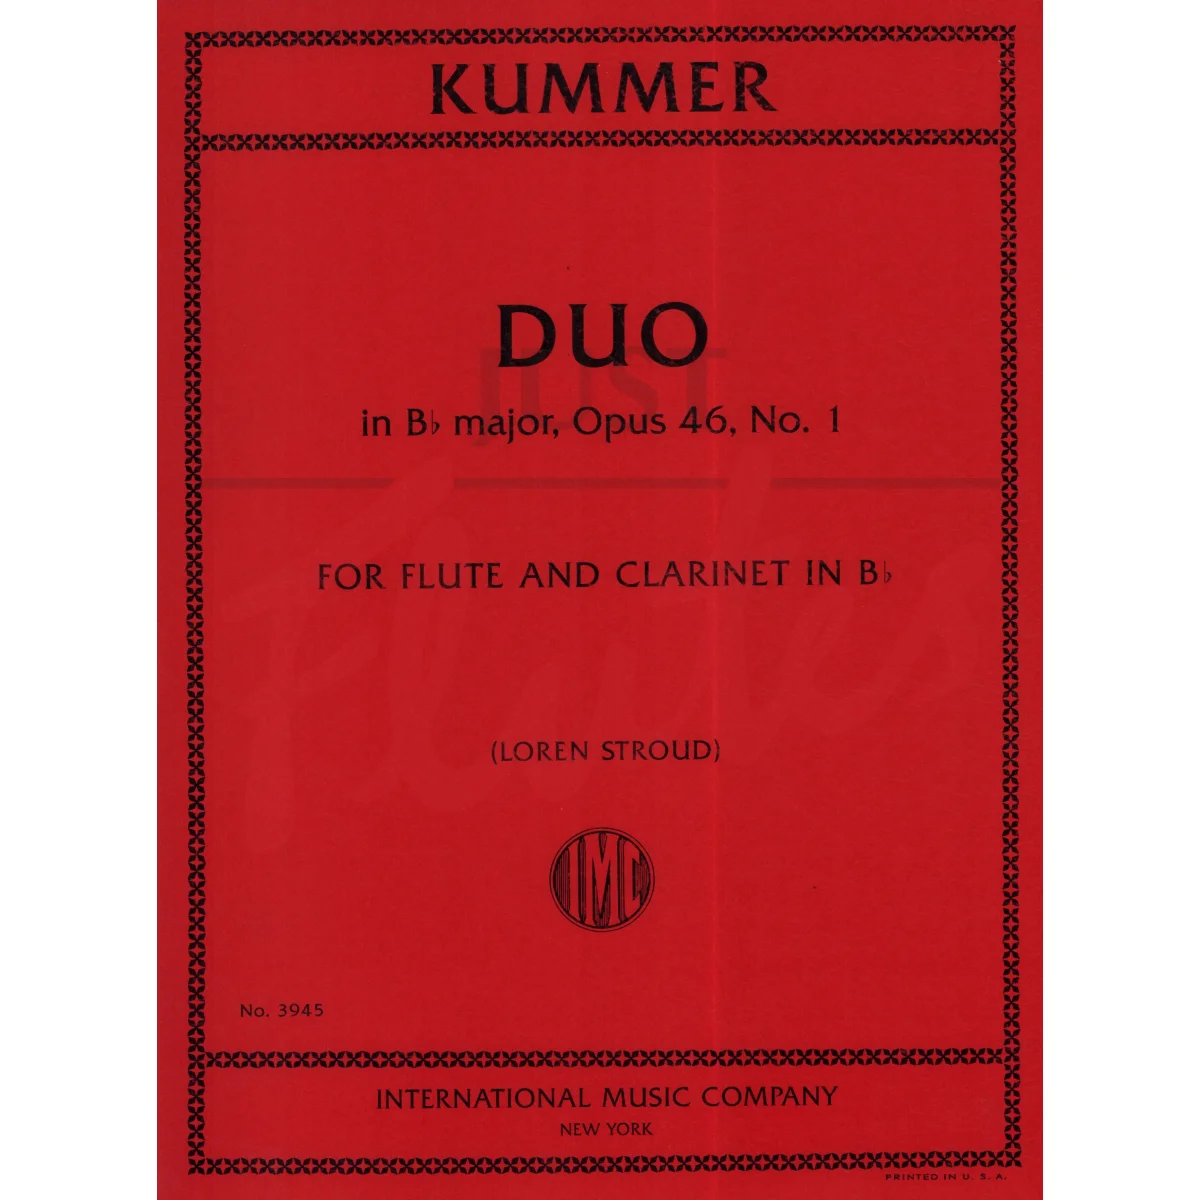 Duo in Bb major for Flute and Clarinet